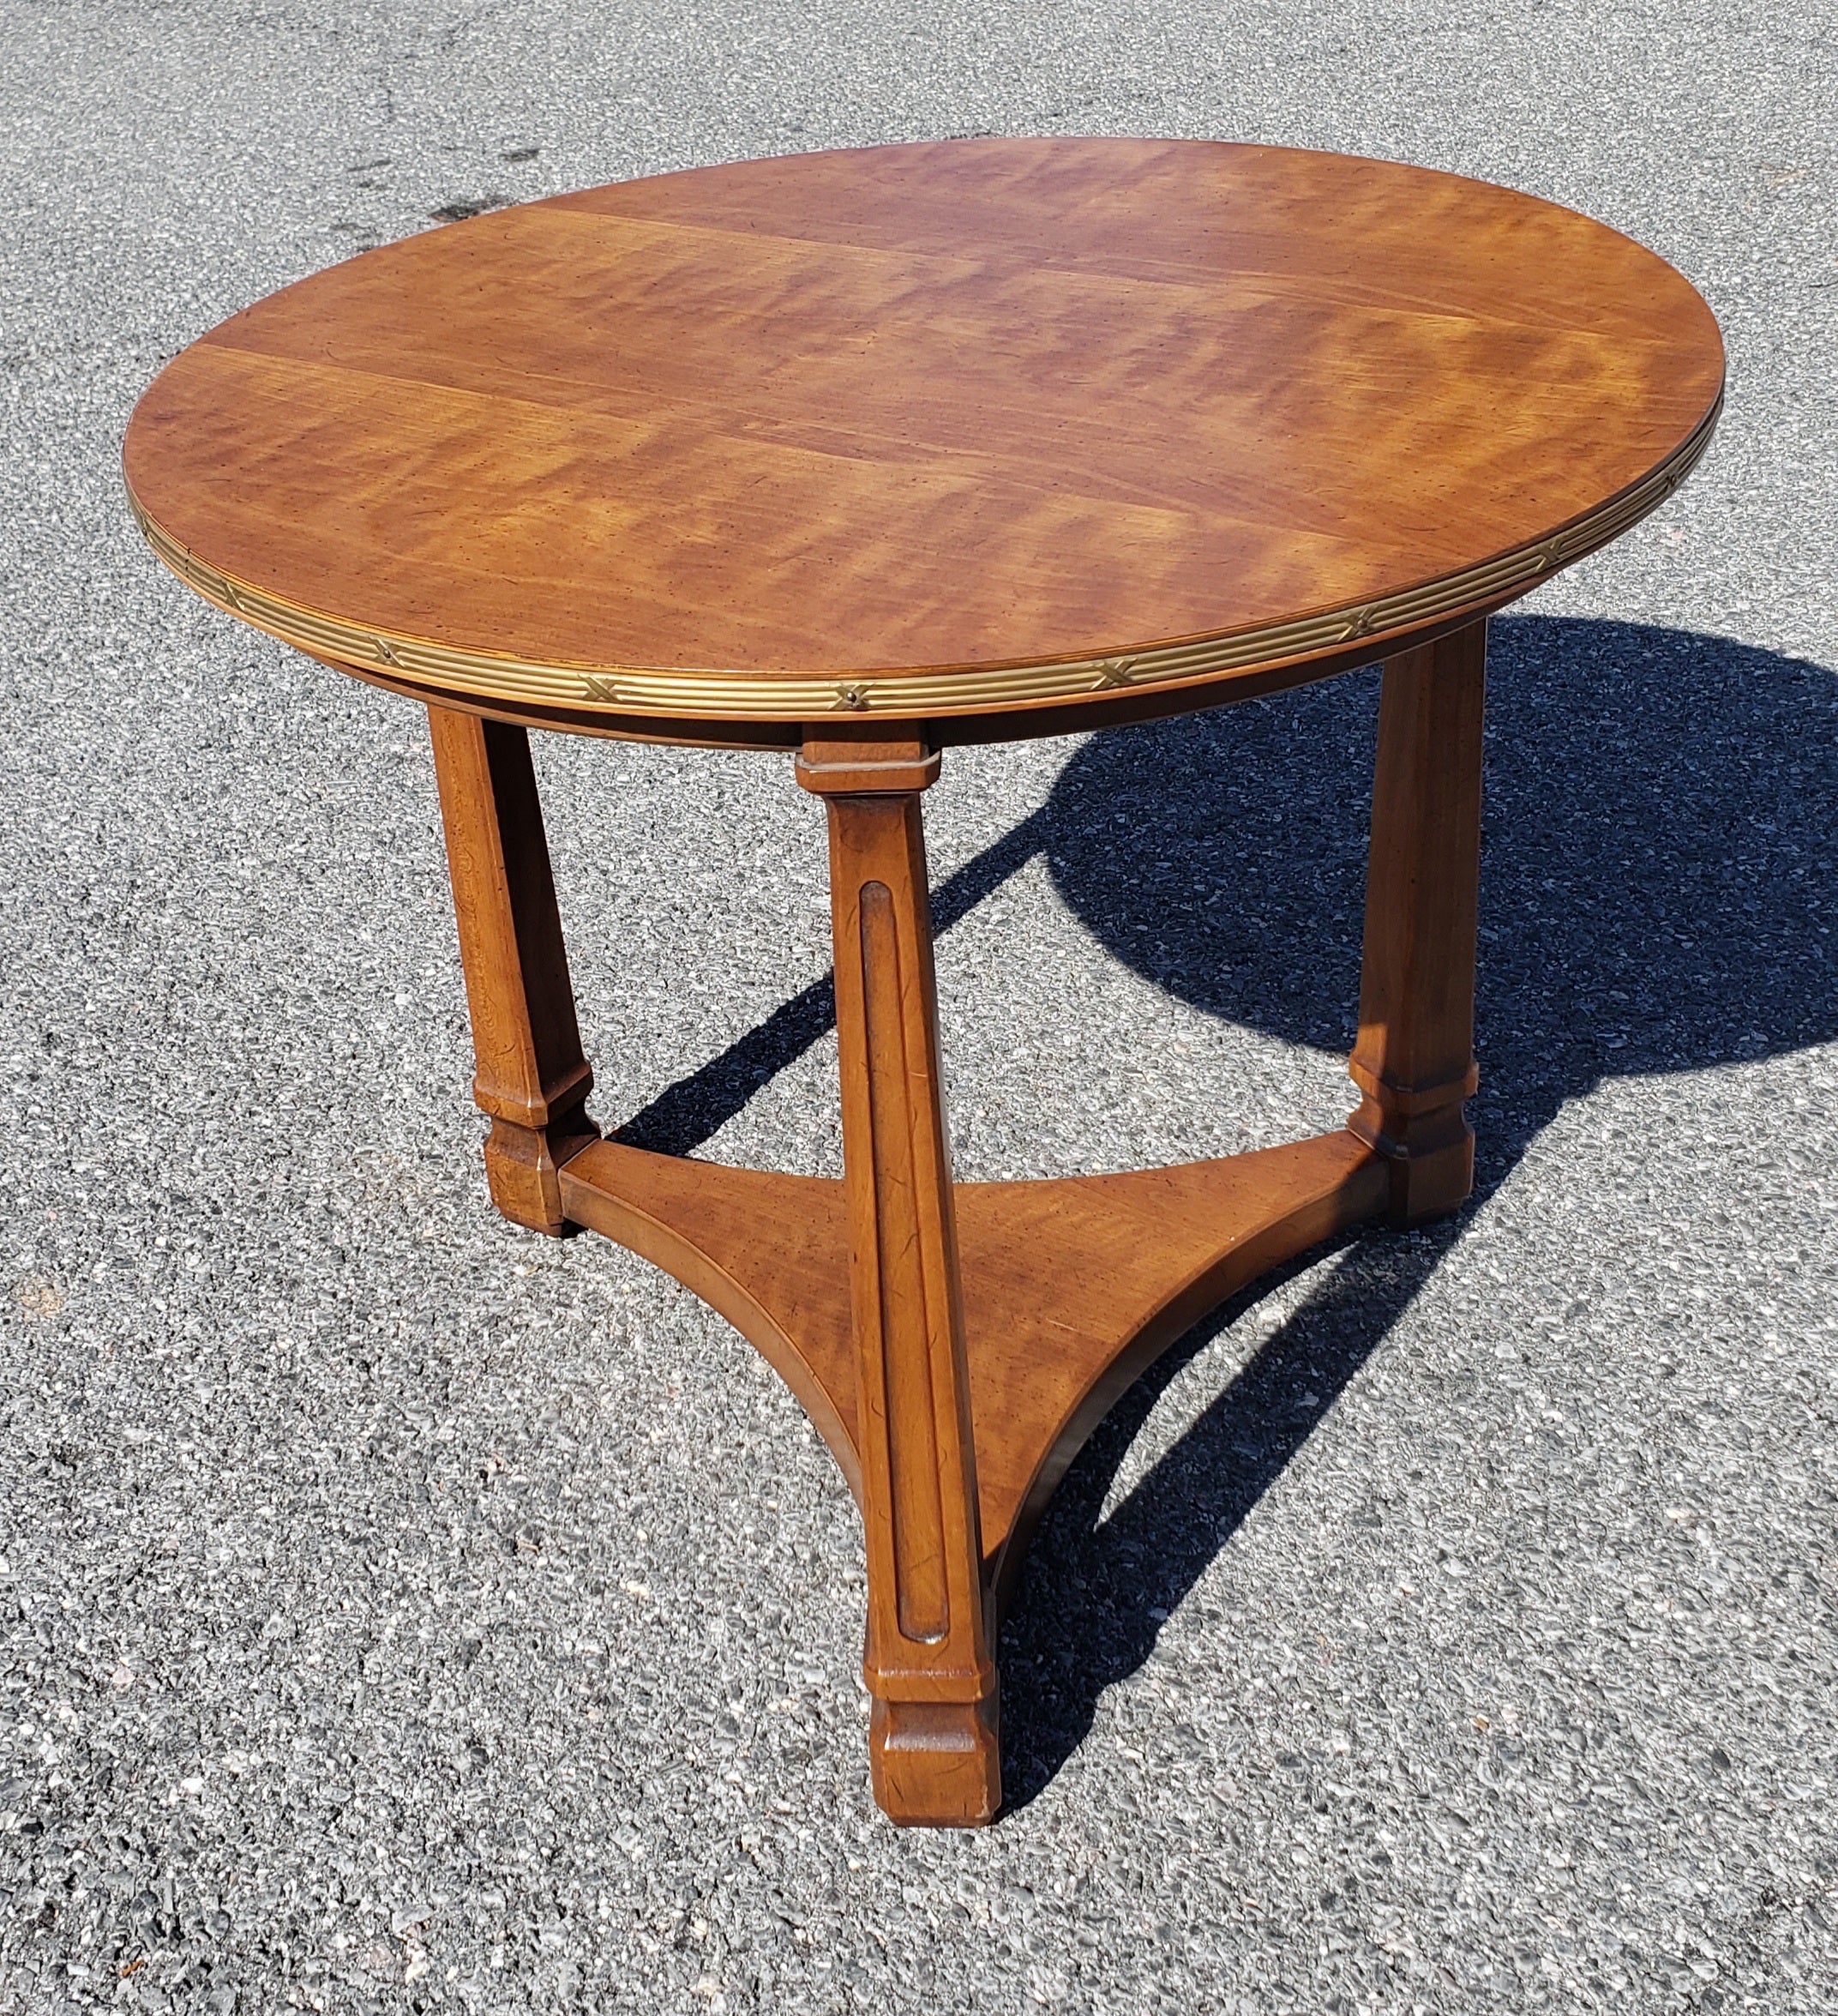 1960s Henredon fine furniture walnut and brass ring side table measuring 27